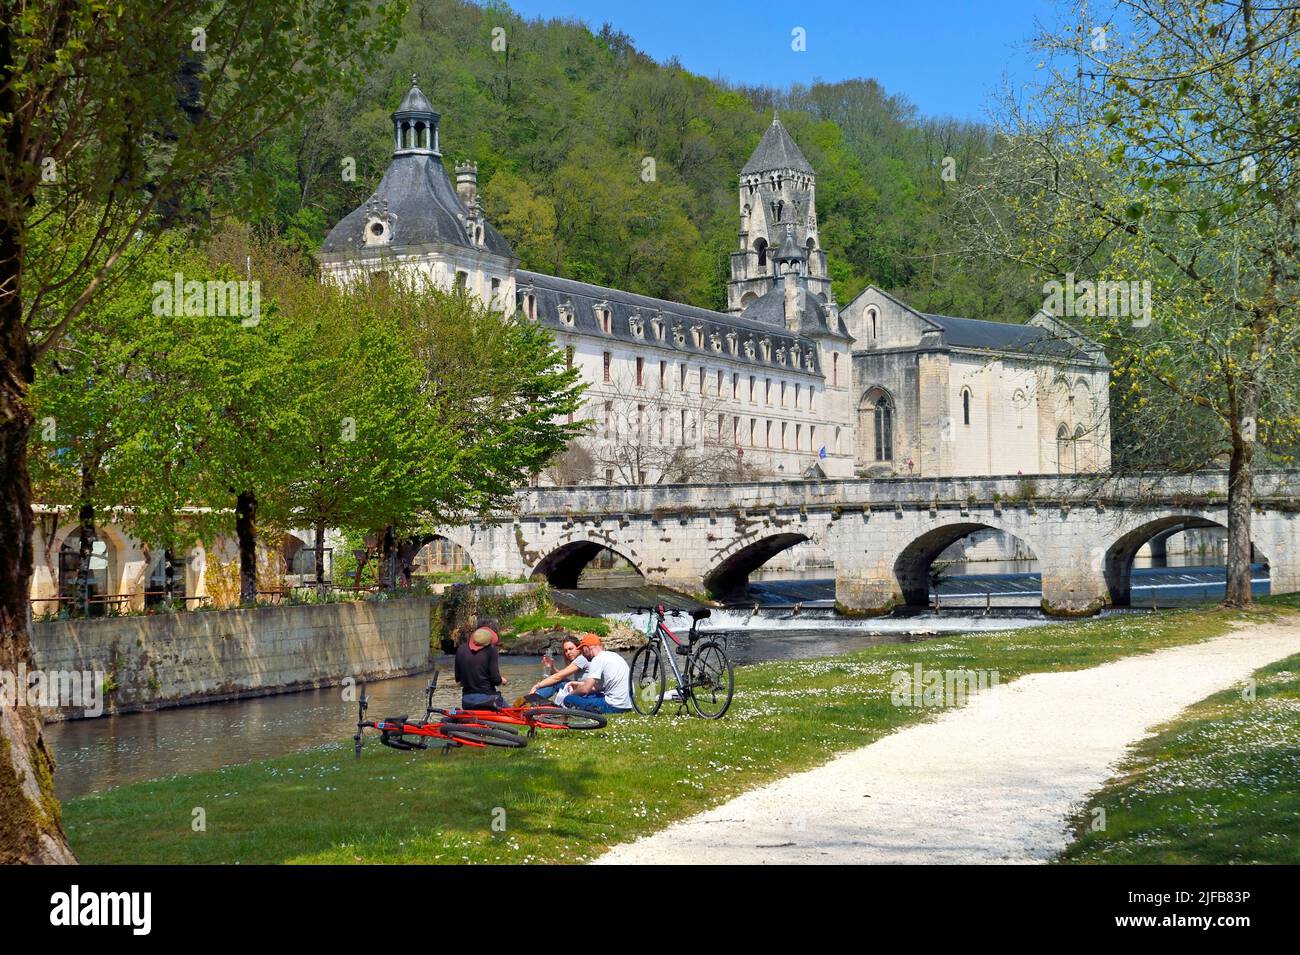 France, Dordogne, Brantome, cyclists picnic in the monks garden of Saint Pierre benedictine abbey along the Dronne river Stock Photo